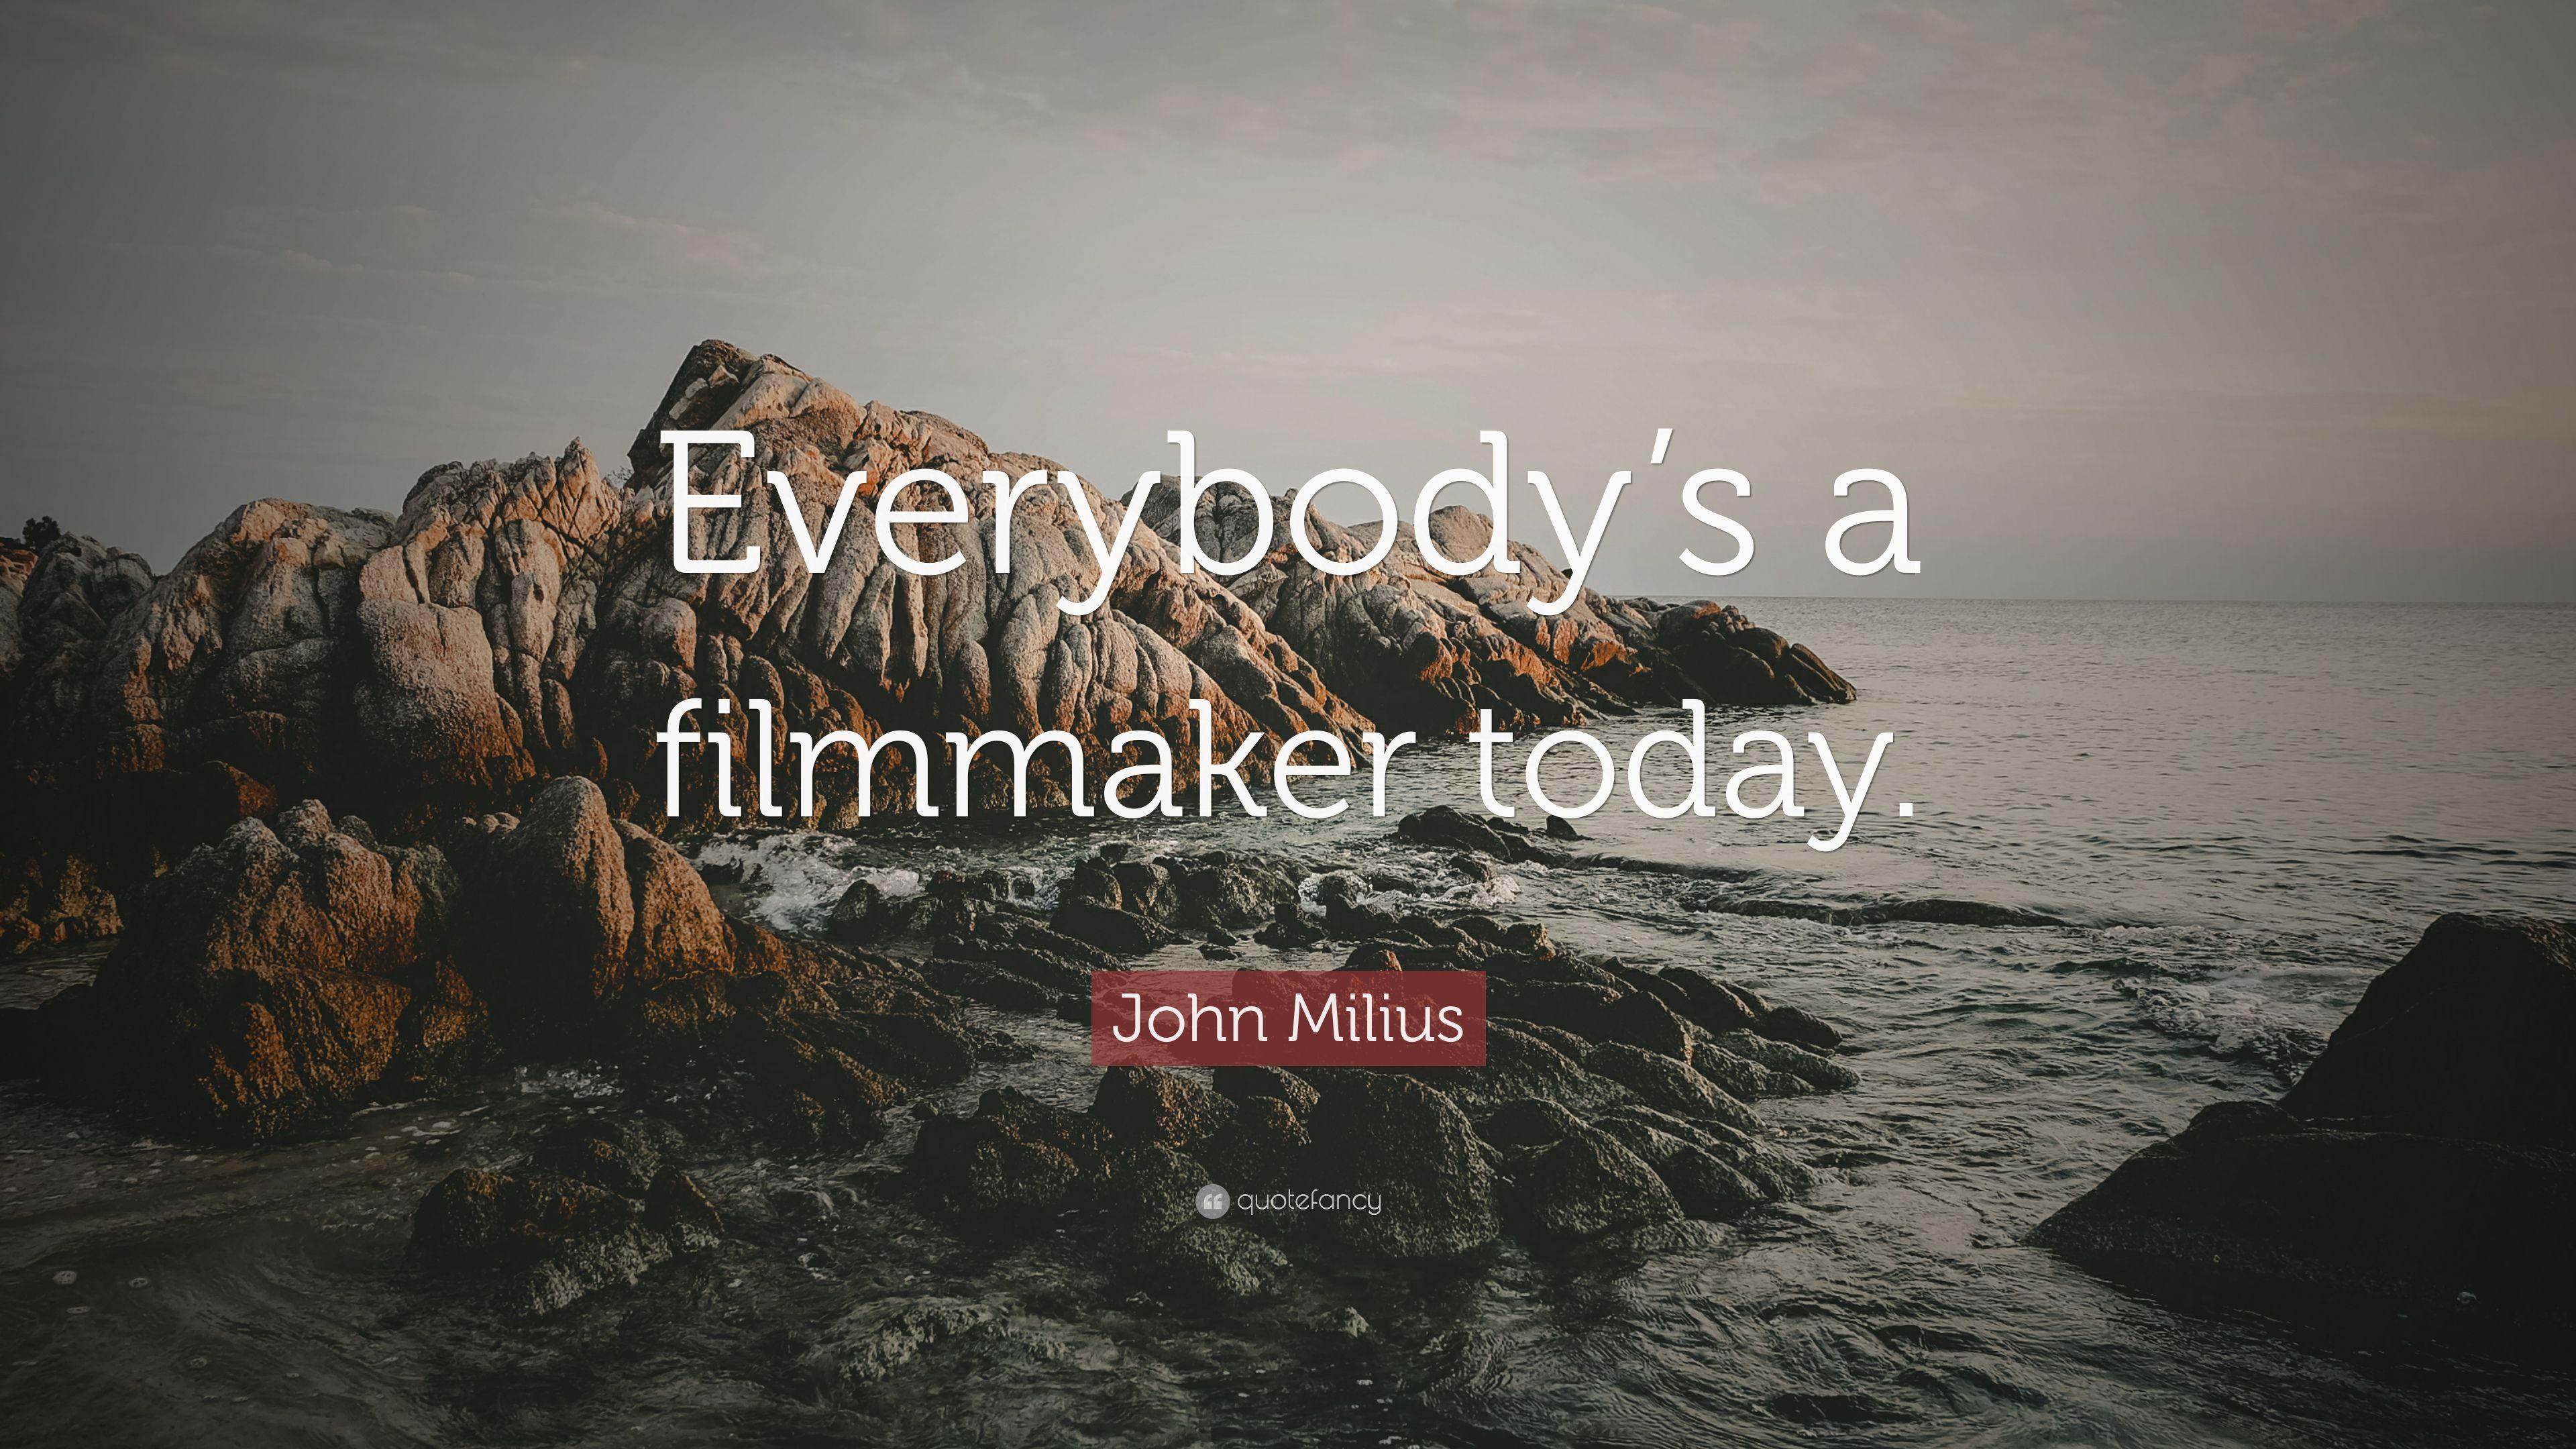 John Milius Quote: “Everybody's a filmmaker today.” 7 wallpaper